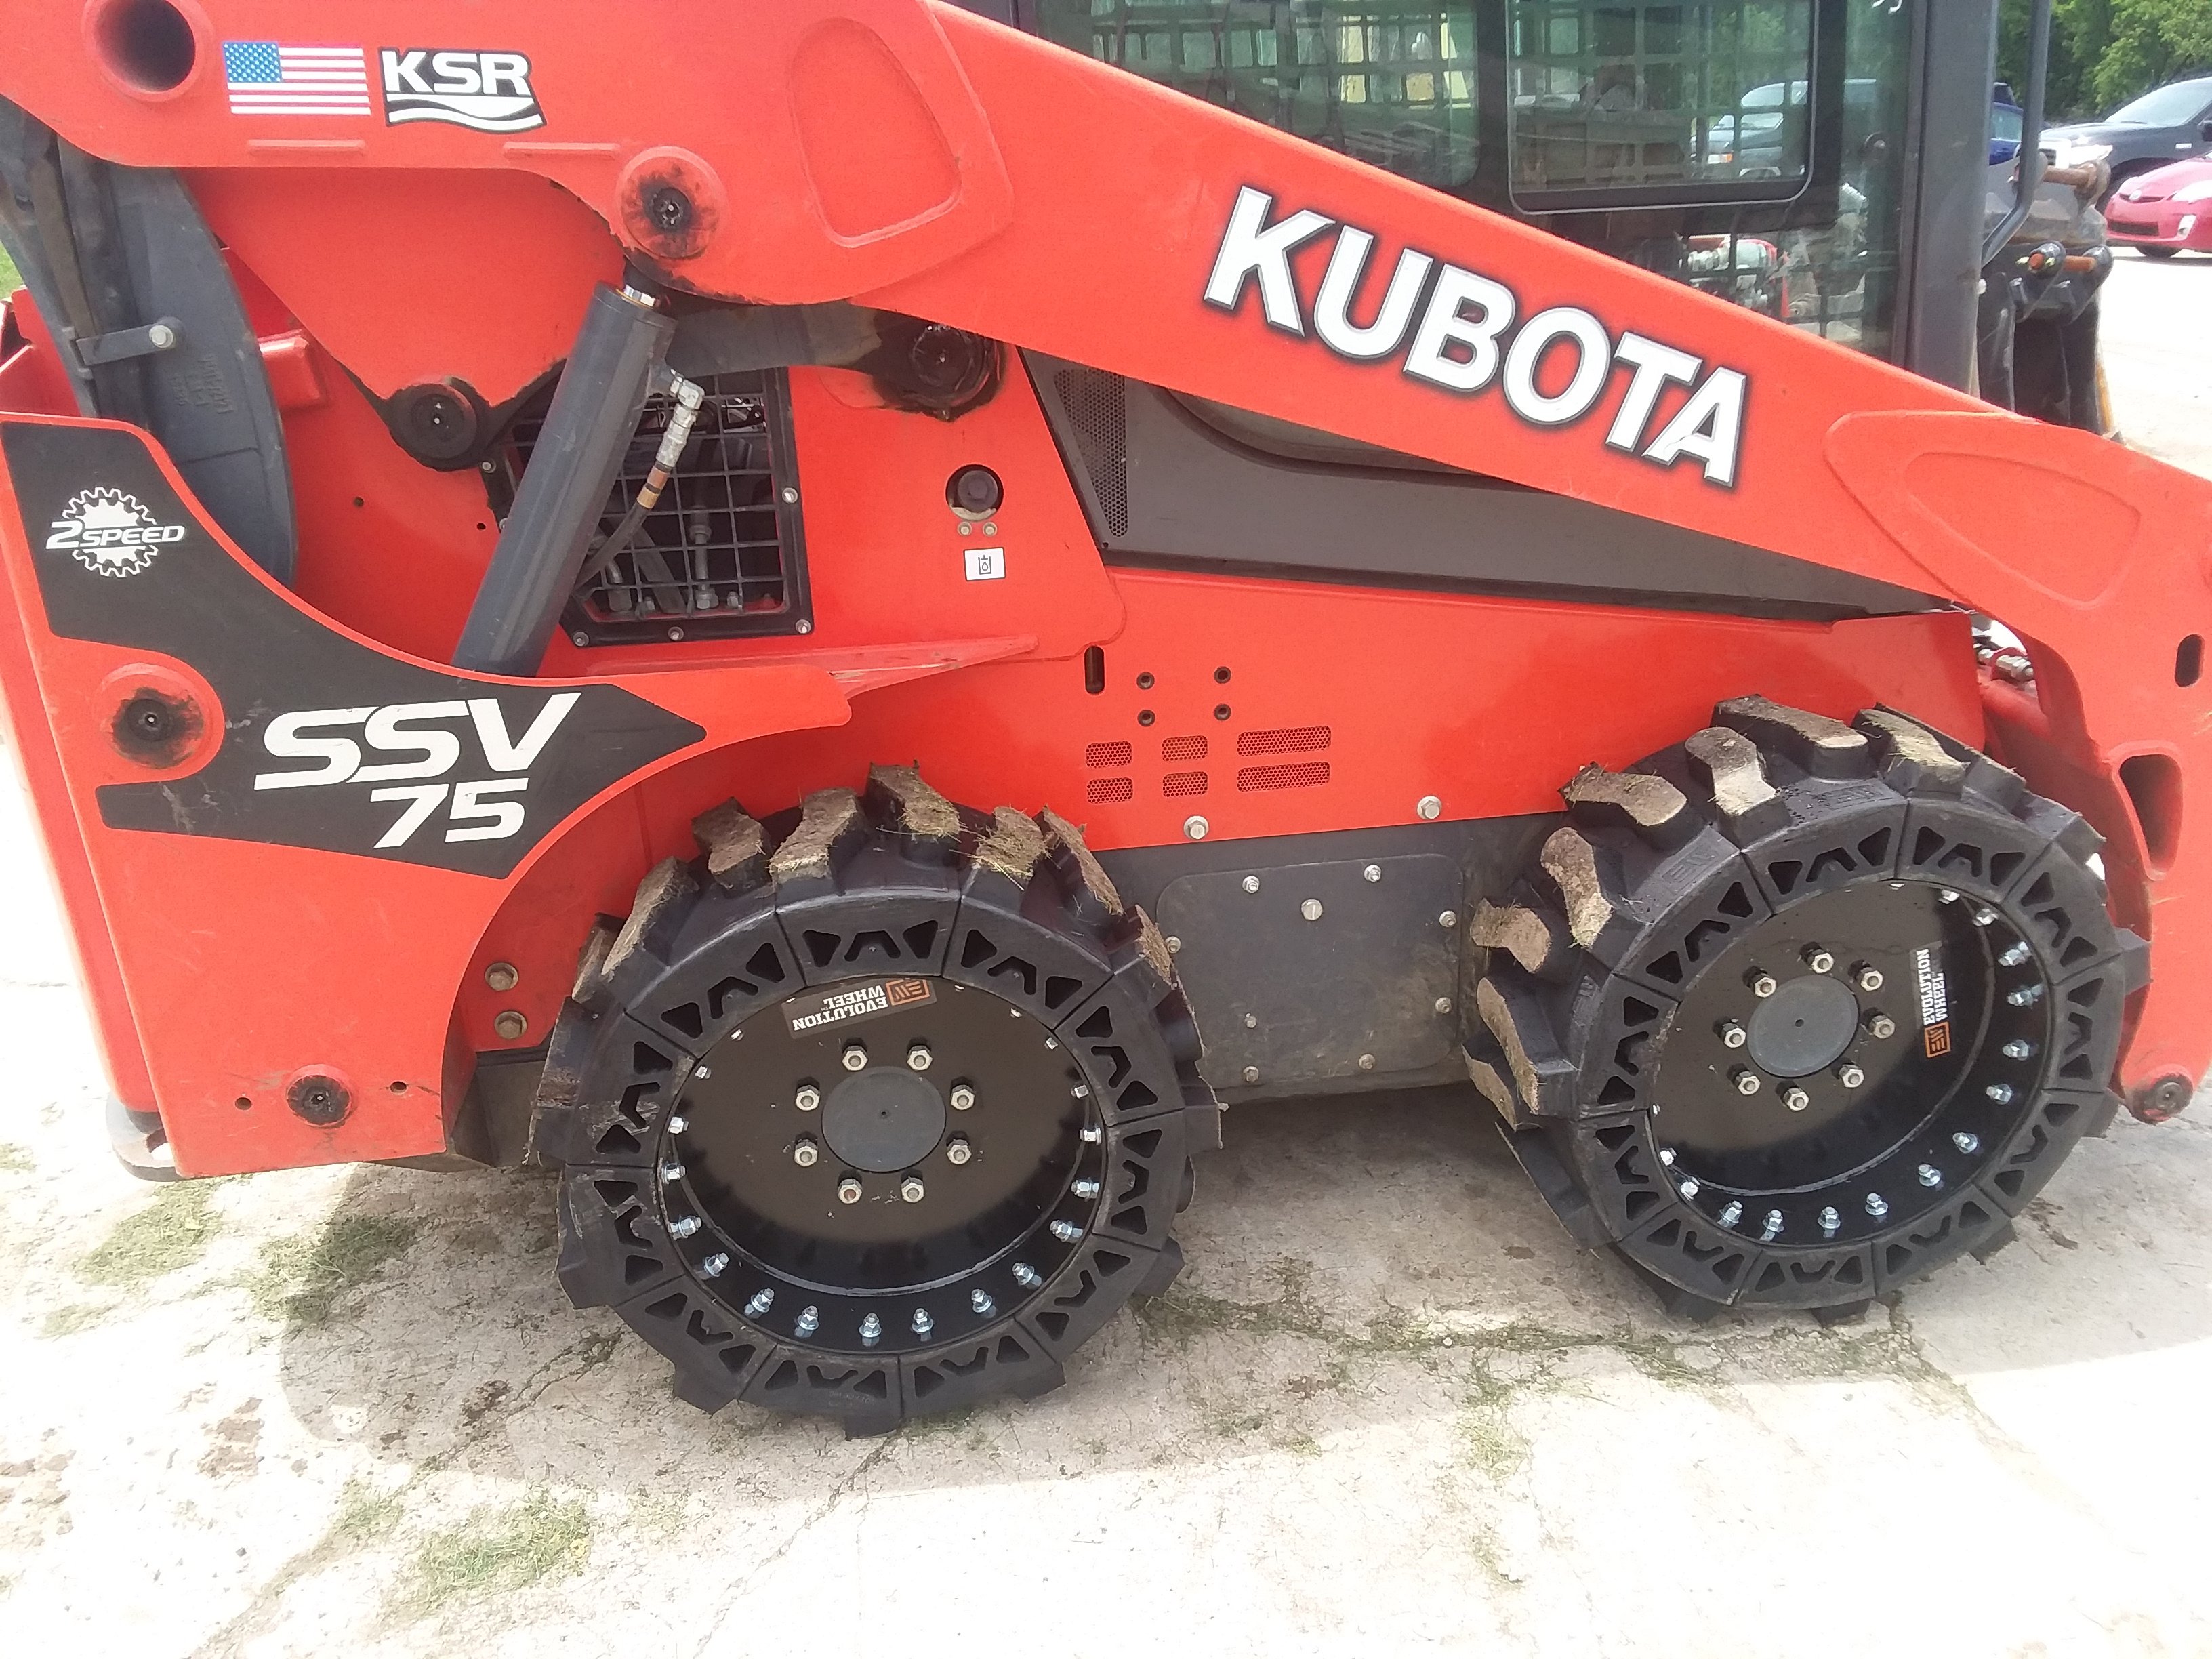 This images shows a red Kubota skid steer using our all terrain skid steer tires.